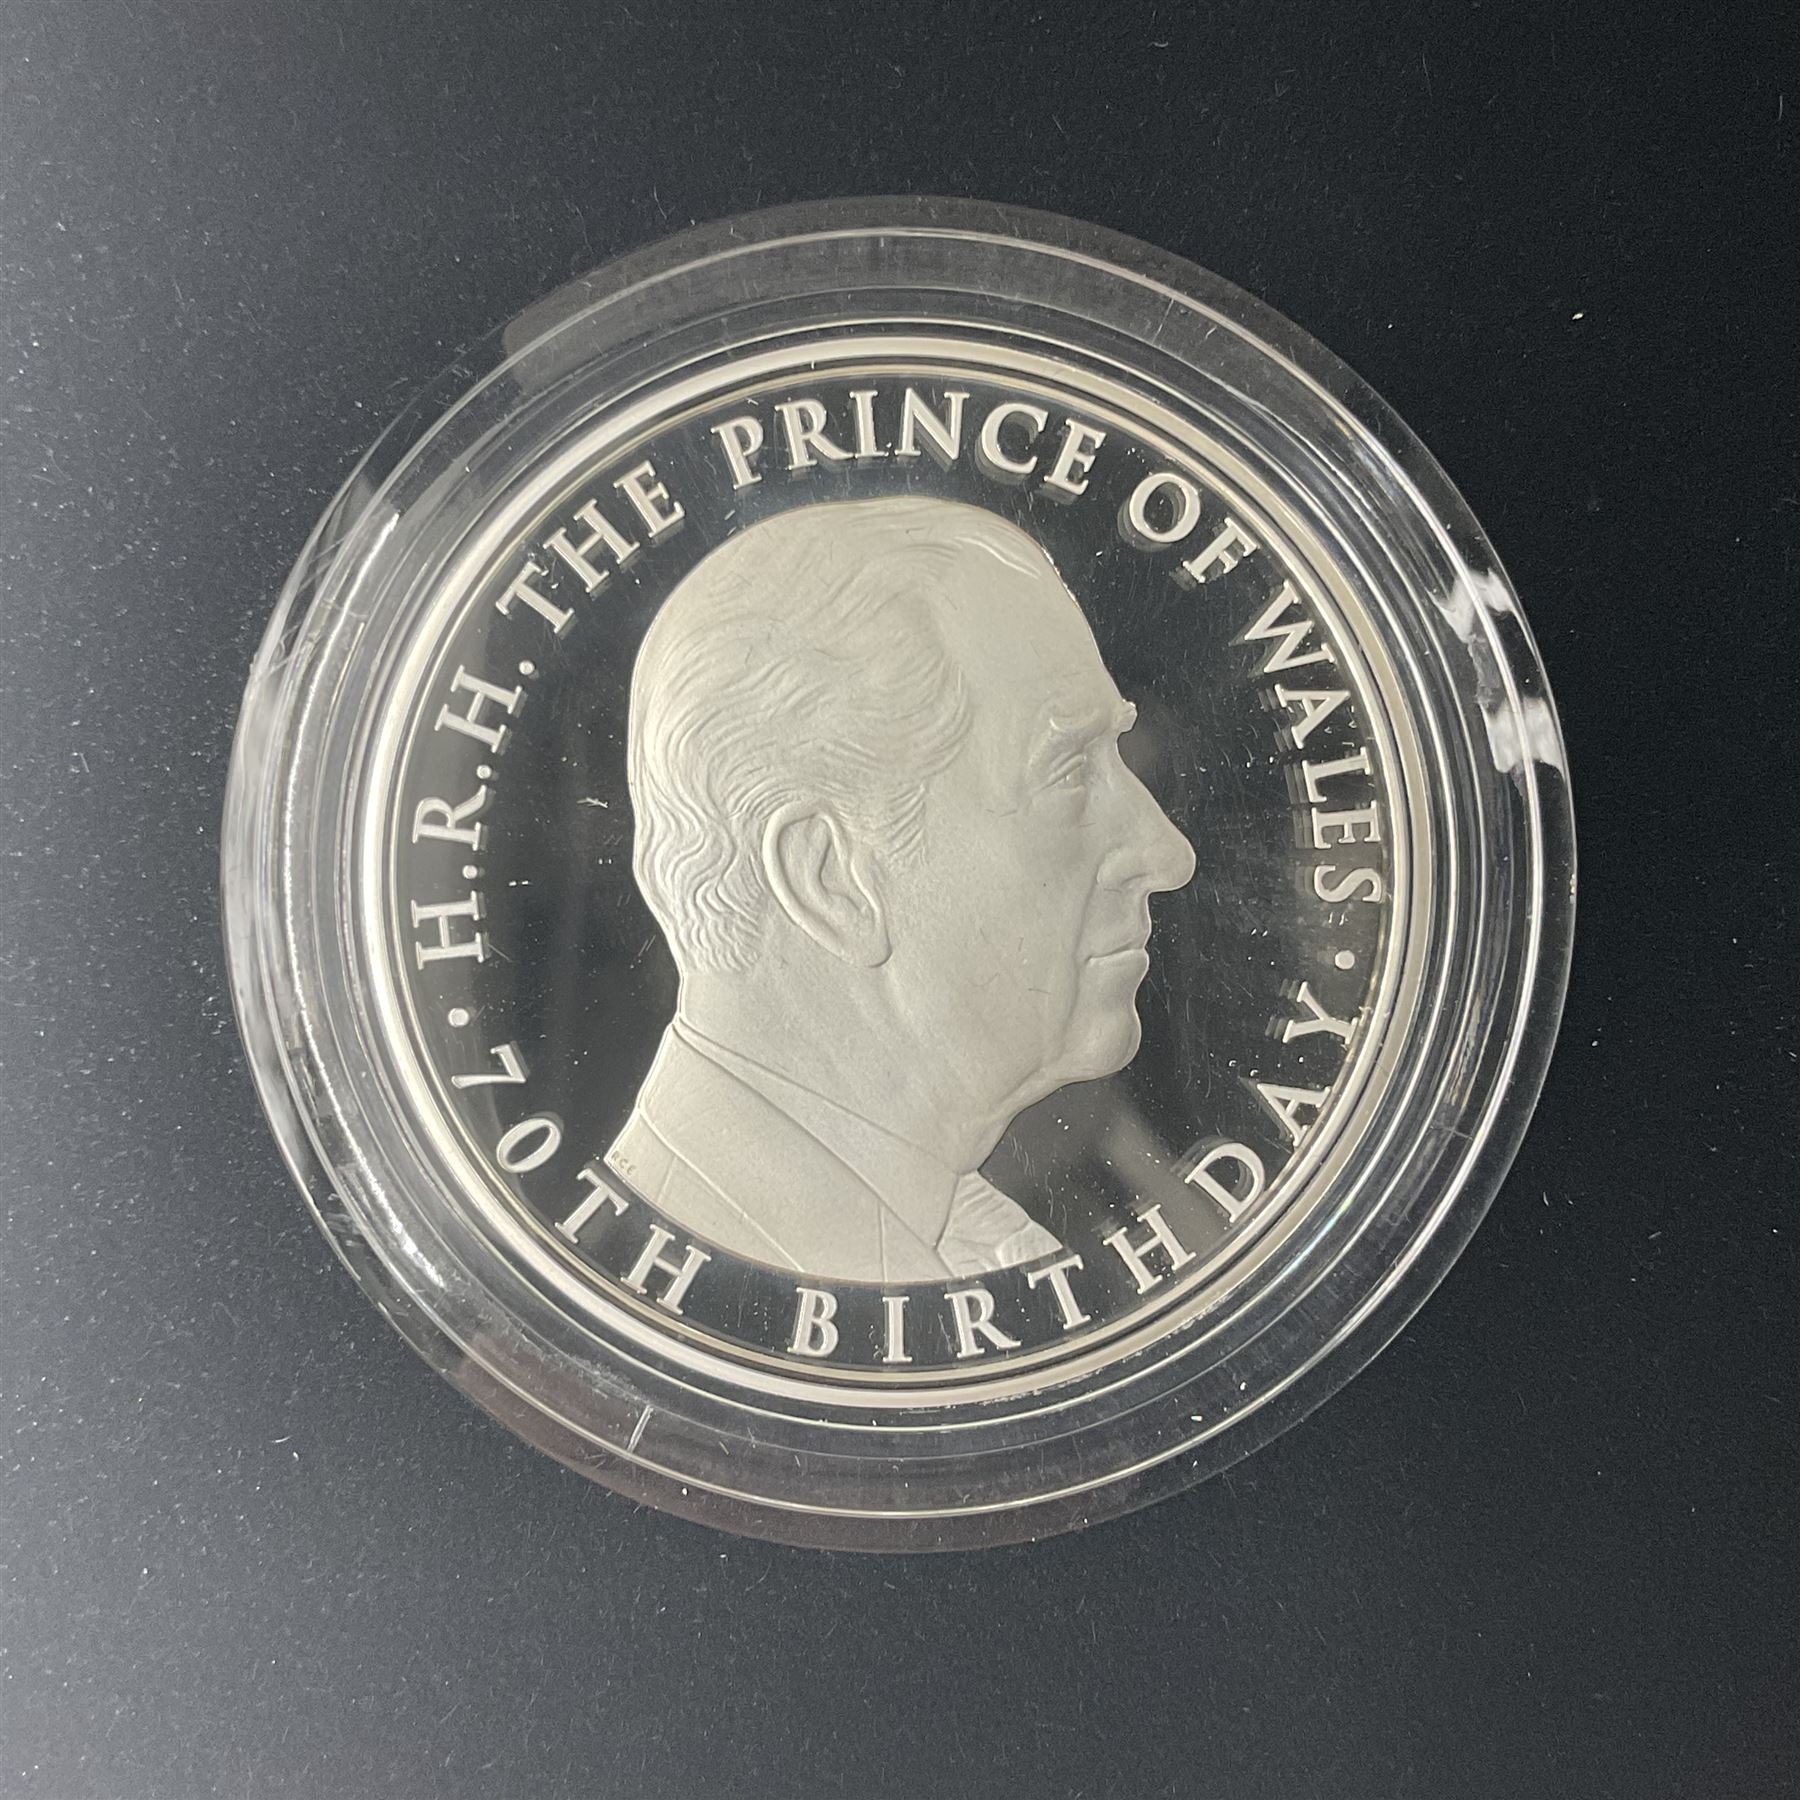 Five The Royal Mint United Kingdom 2018 silver proof piedfort five pound coins - Image 4 of 16